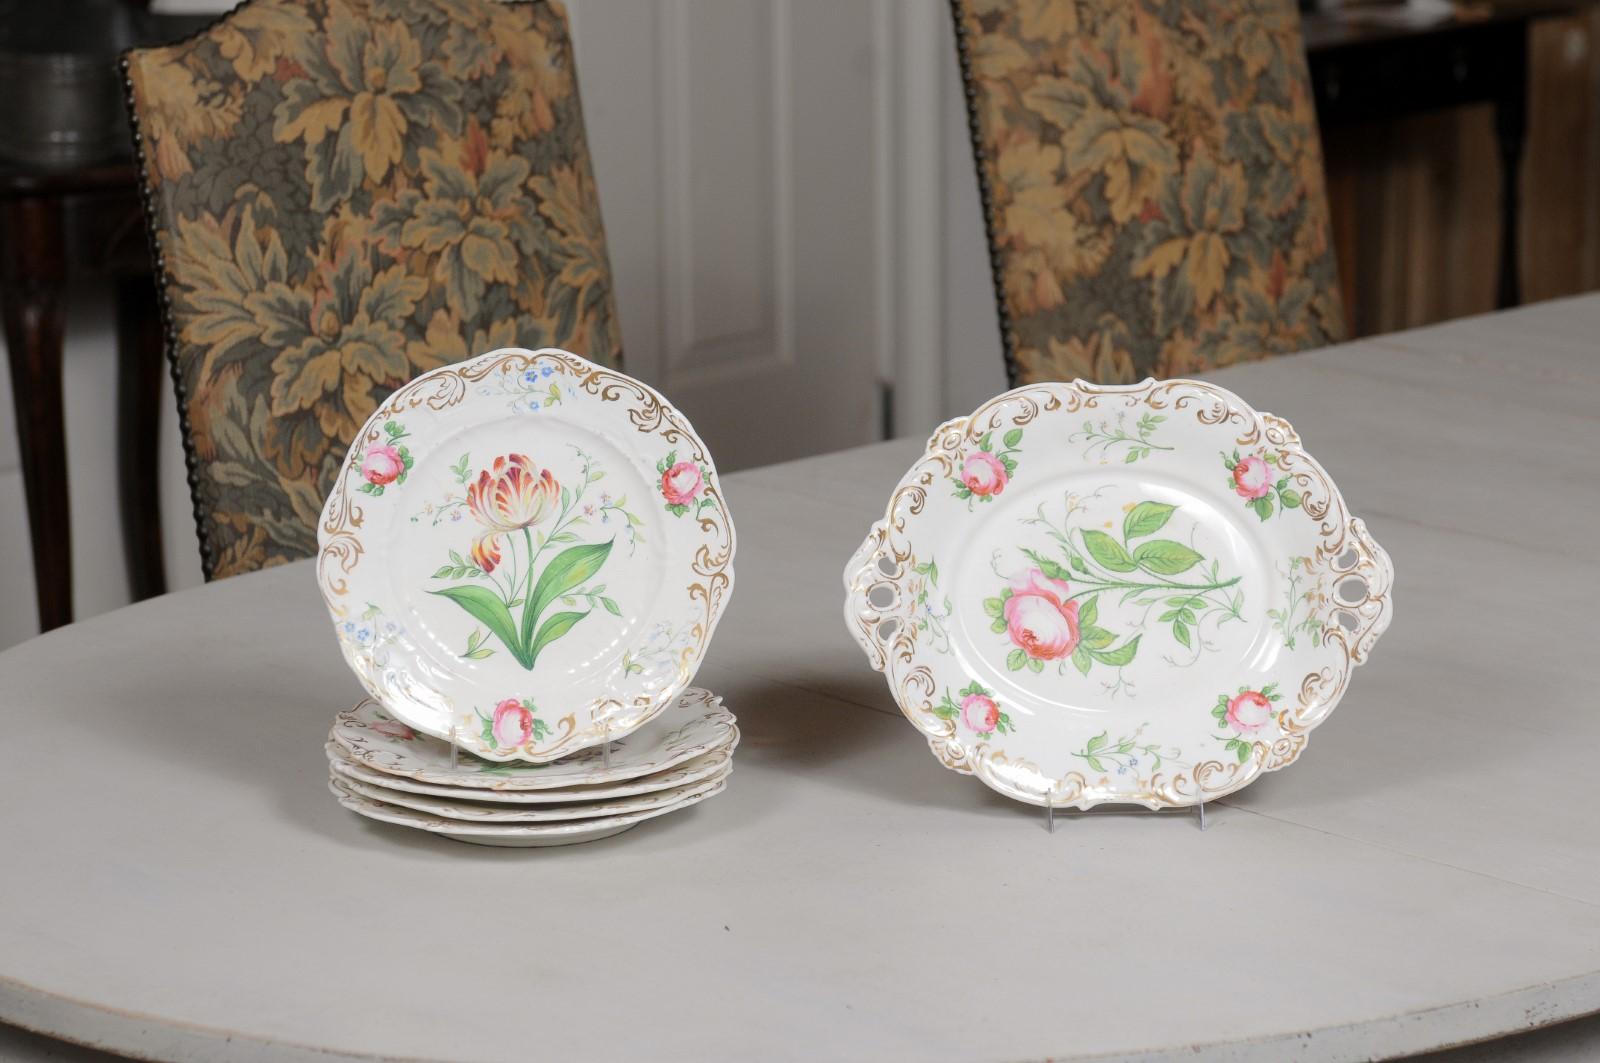 A French Paris Porcelain dessert set from the 19th century, consisting of five dessert plates and a single compote, with pink roses décor. Created in France during the 19th century, this 'Porcelaine de Paris' dessert set immediately charms us with